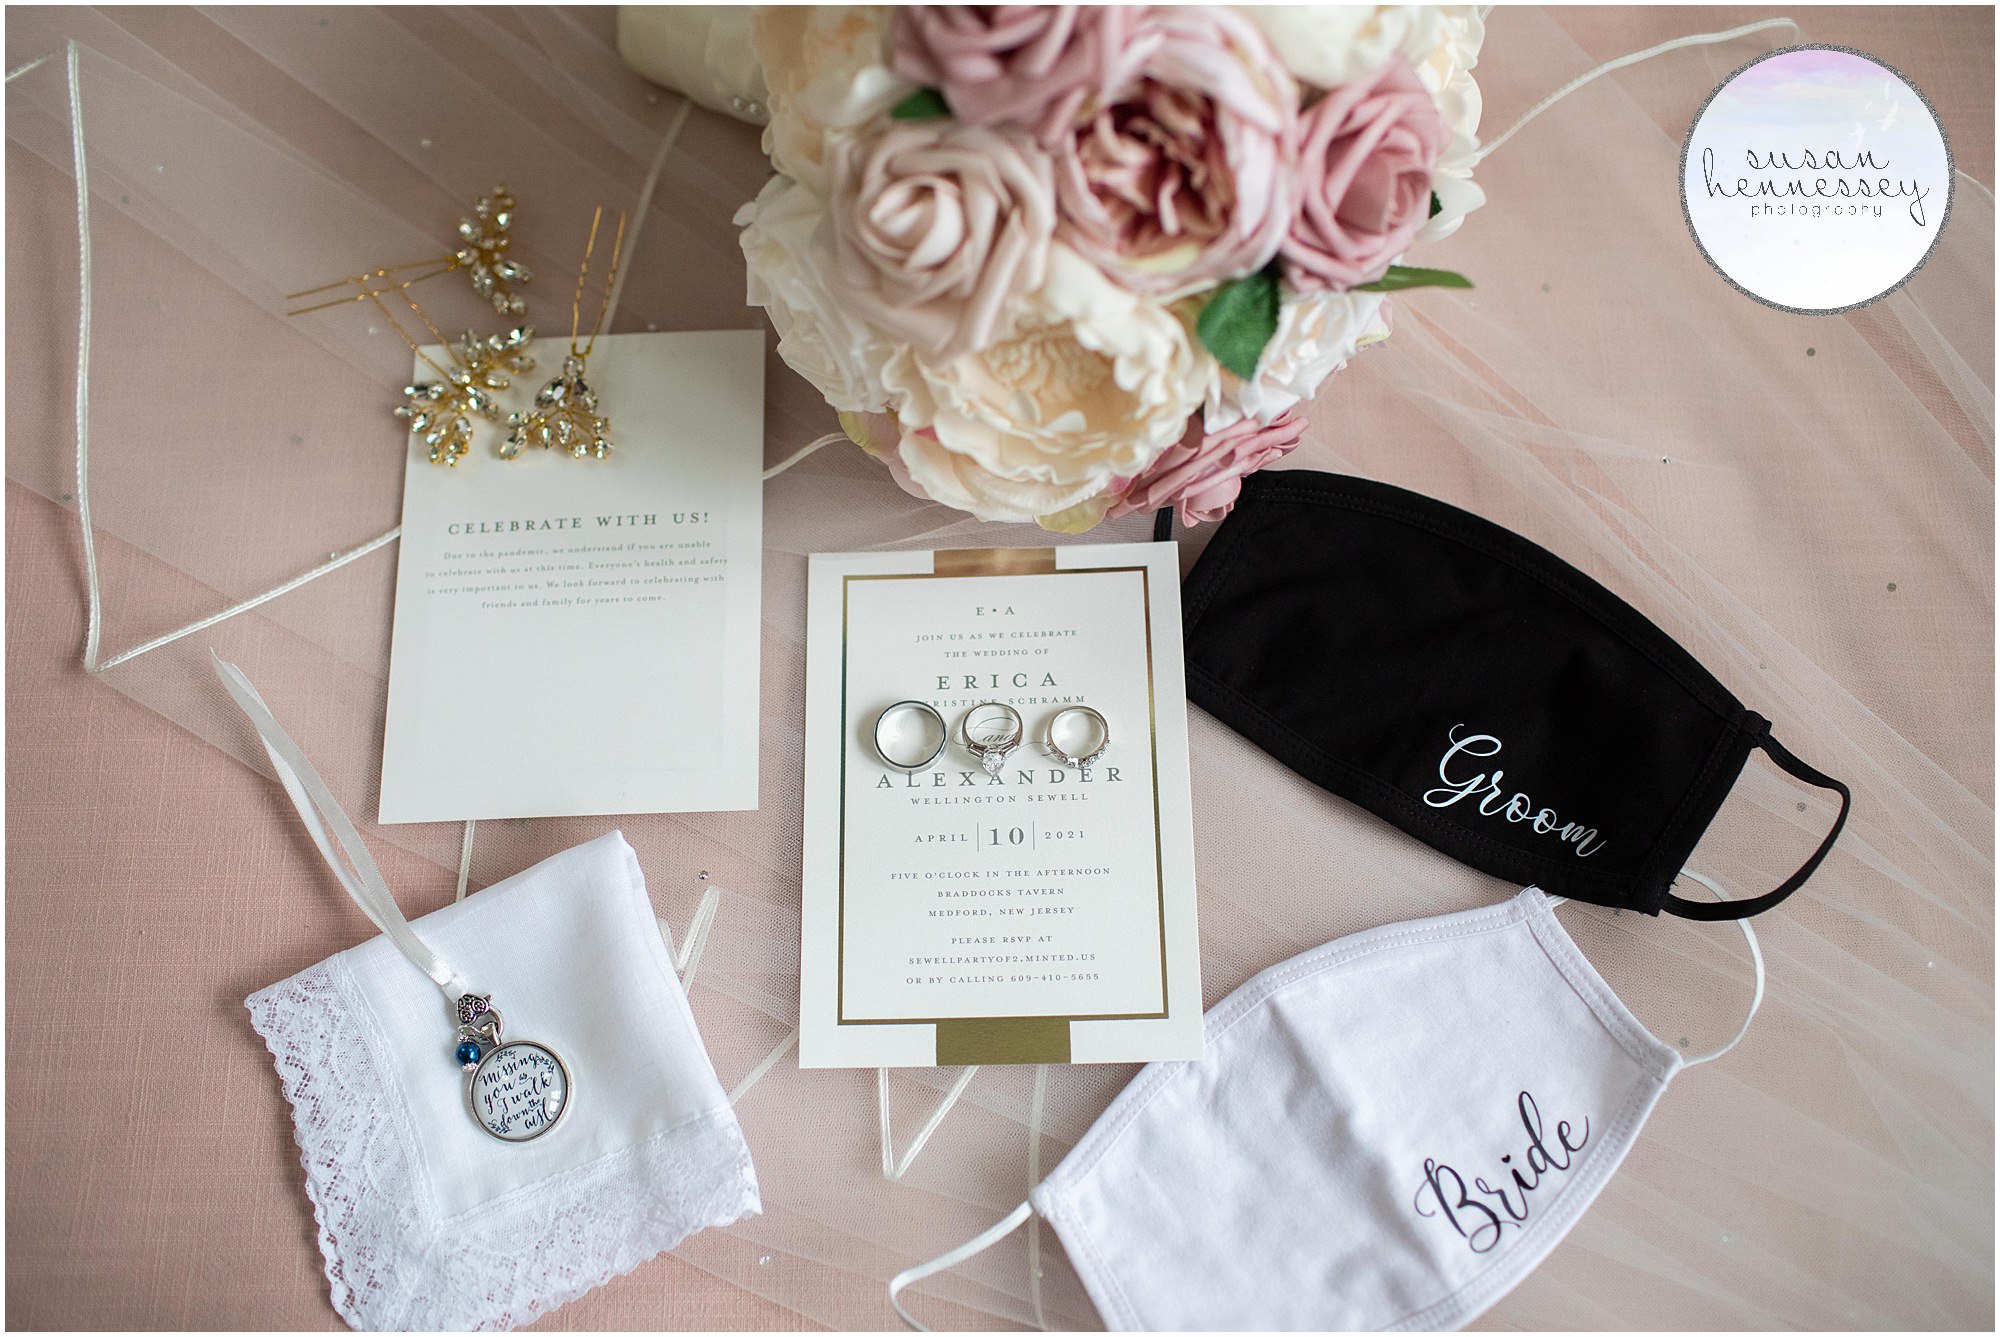 Planning a Micro Wedding? Don't forget your coordinated details.